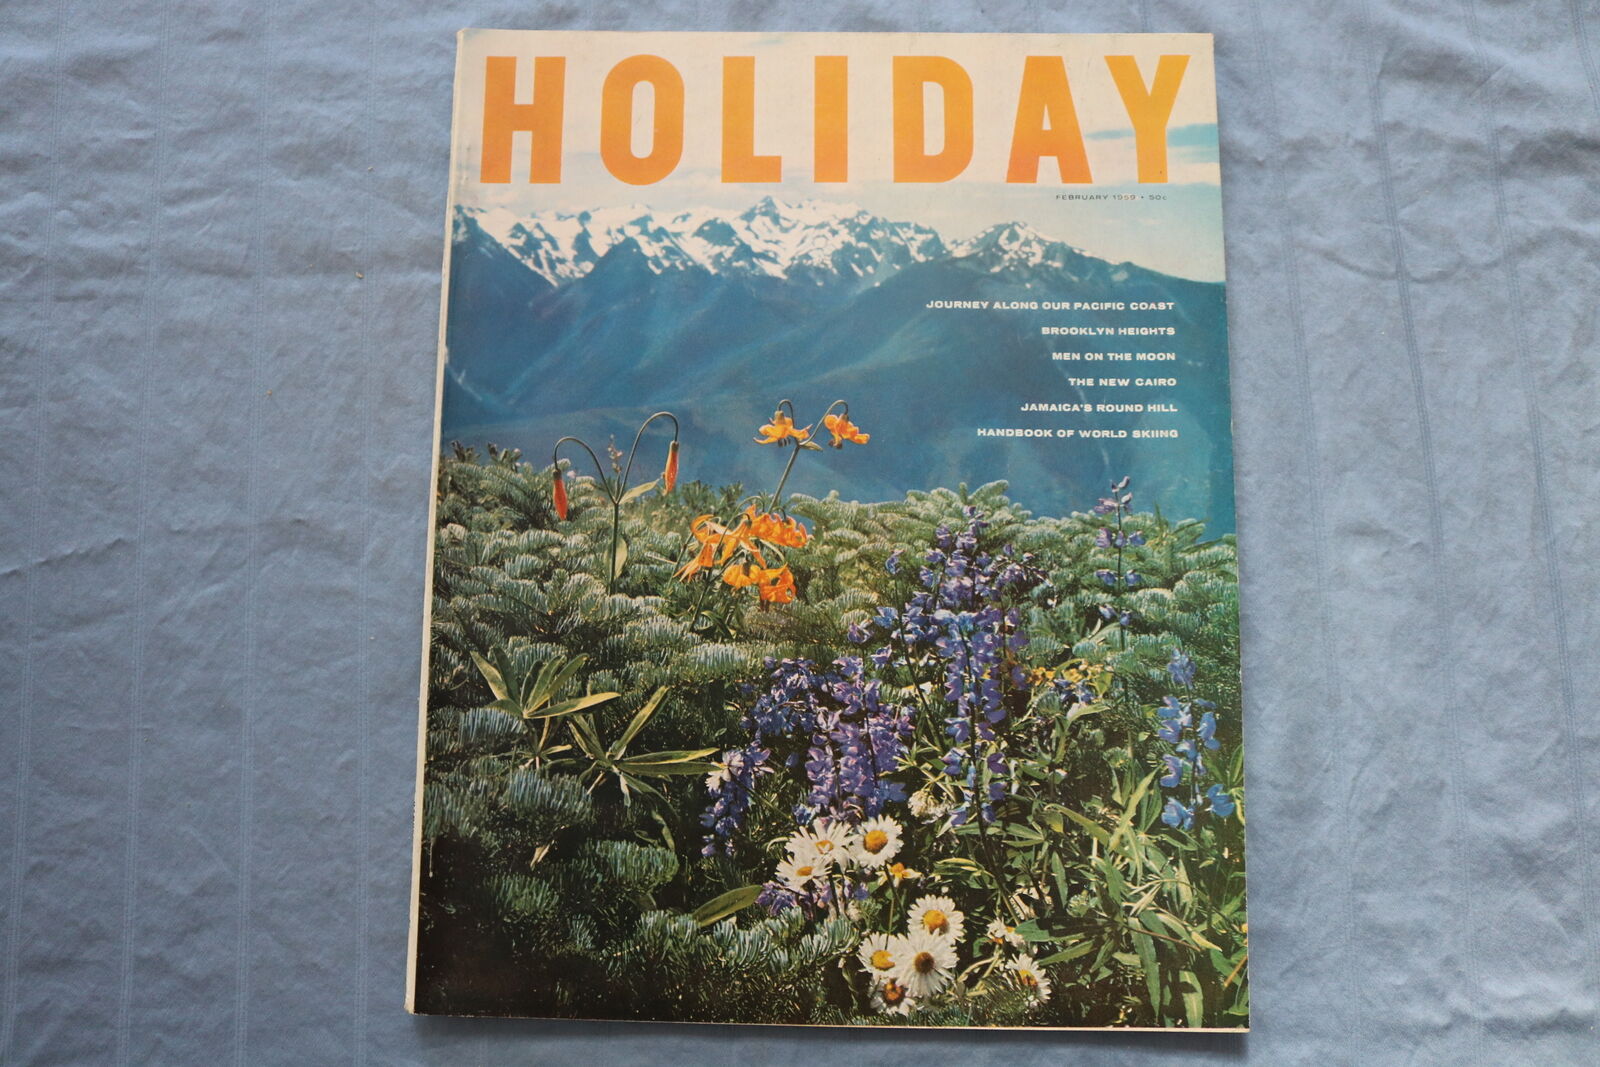 1959 FEBRUARY HOLIDAY MAGAZINE - JOURNEY ALONG OUR PACIFIC COAST - SP 4786R